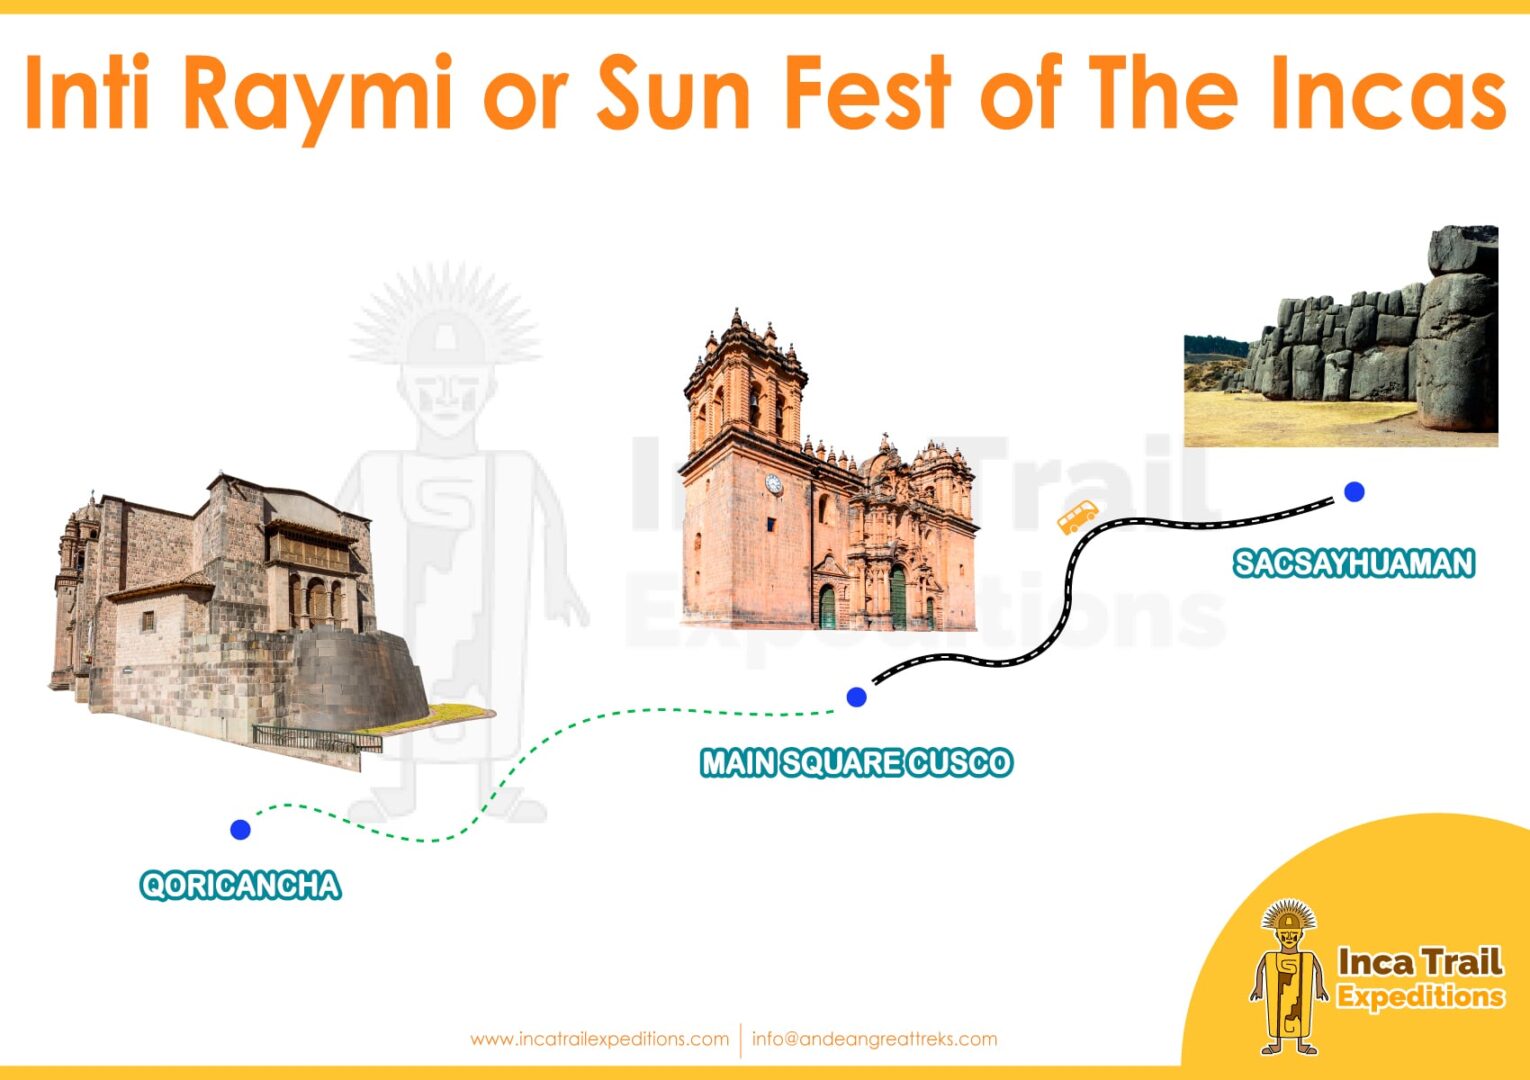 INTI-RAYMI-OR-SUN-FEST-BY-INCA-TRAIL-EXPEDITIONS